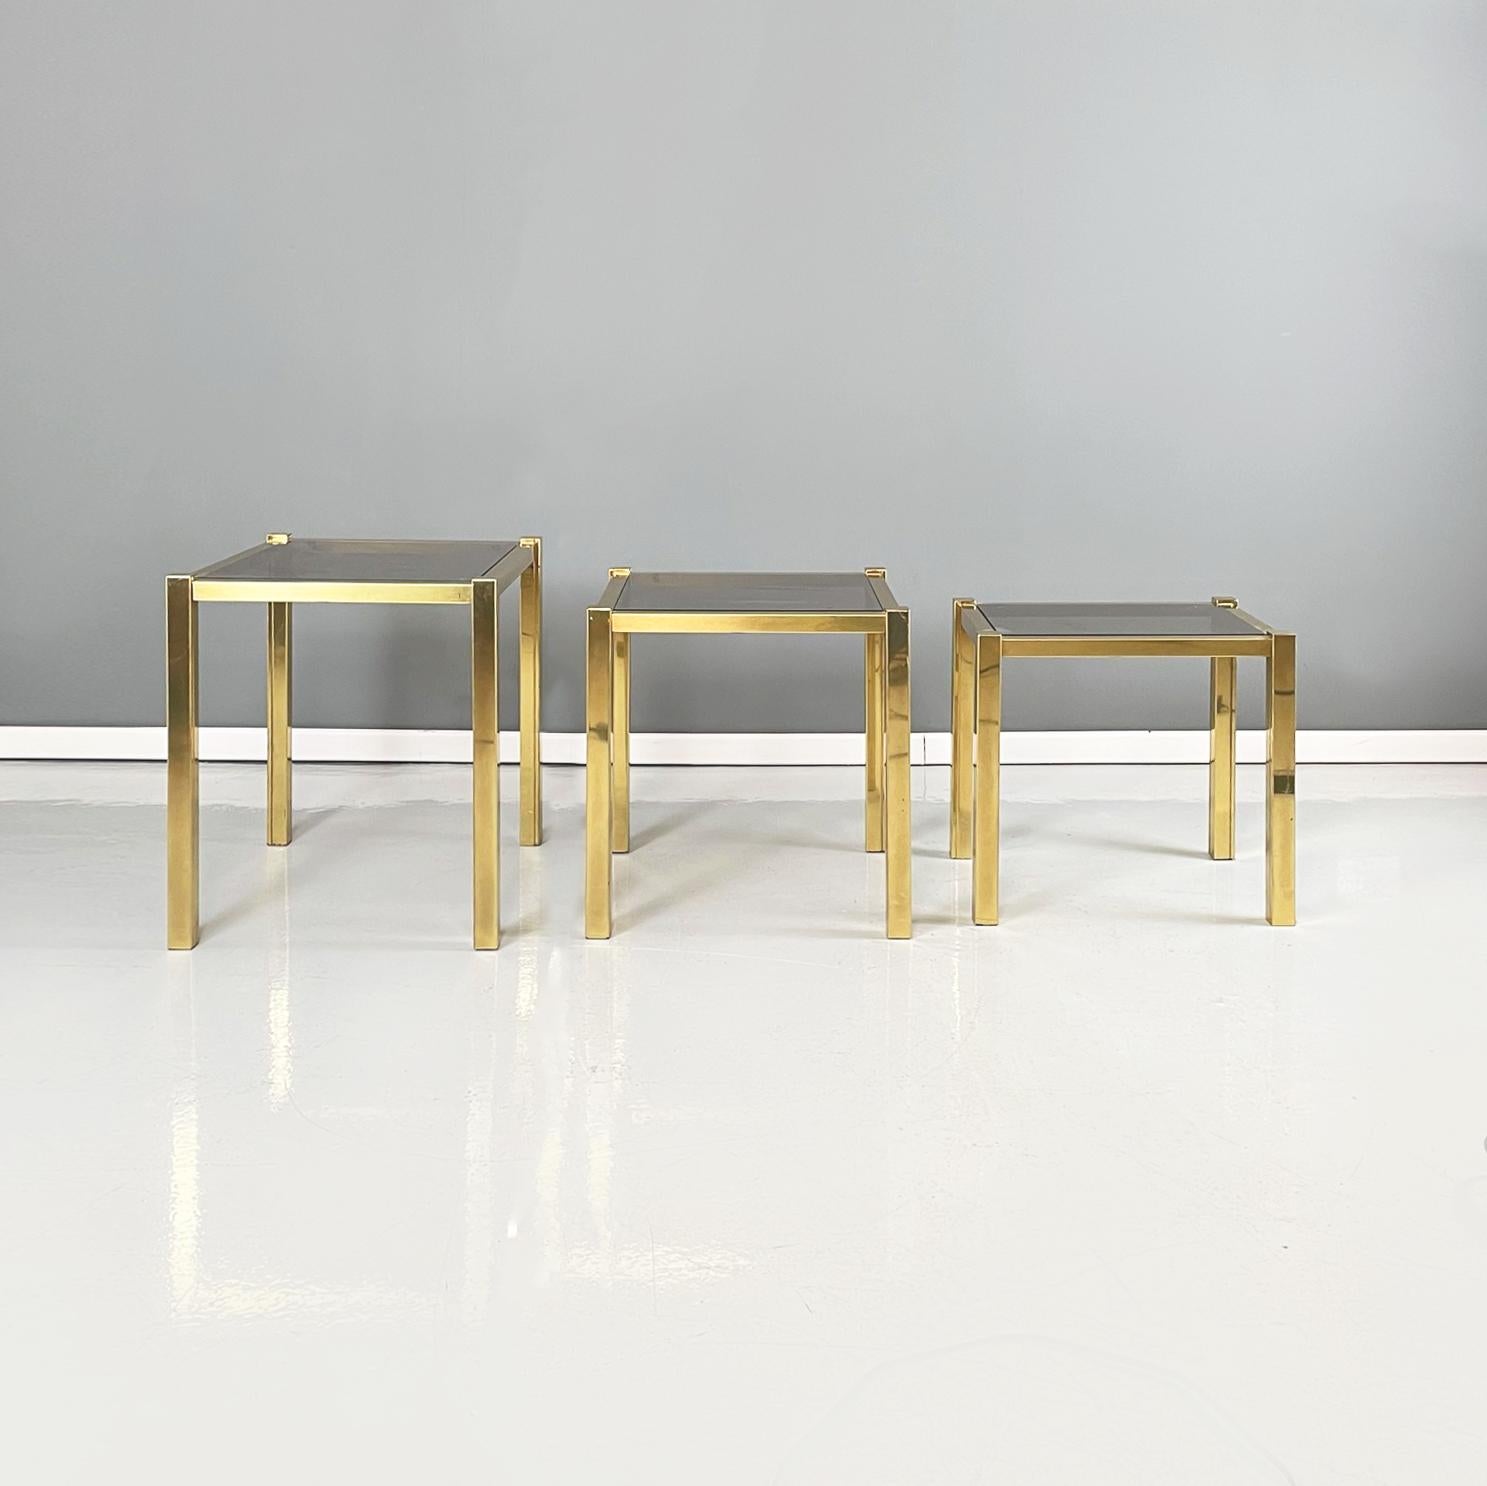 Italian Modern Trio of coffee Tables in Brass and Smoked Glass, 1970s For Sale 2